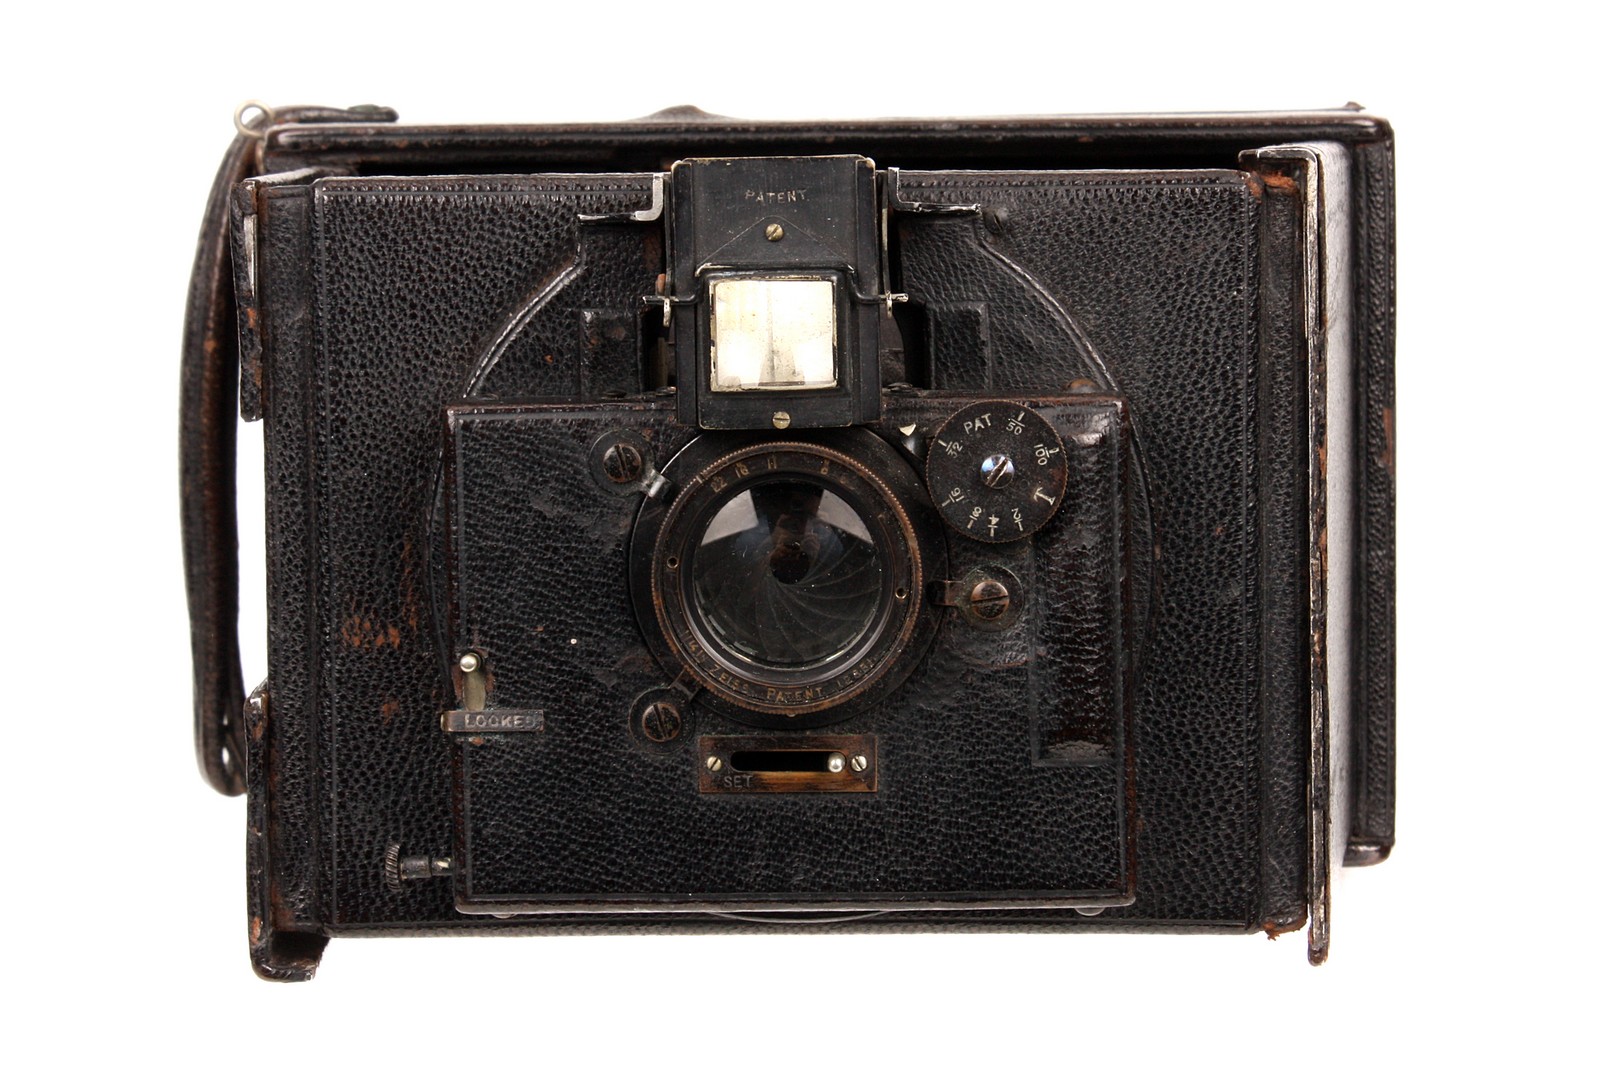 An Adams & Co. Idento Folding Strut Camera, serial no. 4109, 3¼x4½, with Ross Zeiss f/6.3 lens, - Image 2 of 2